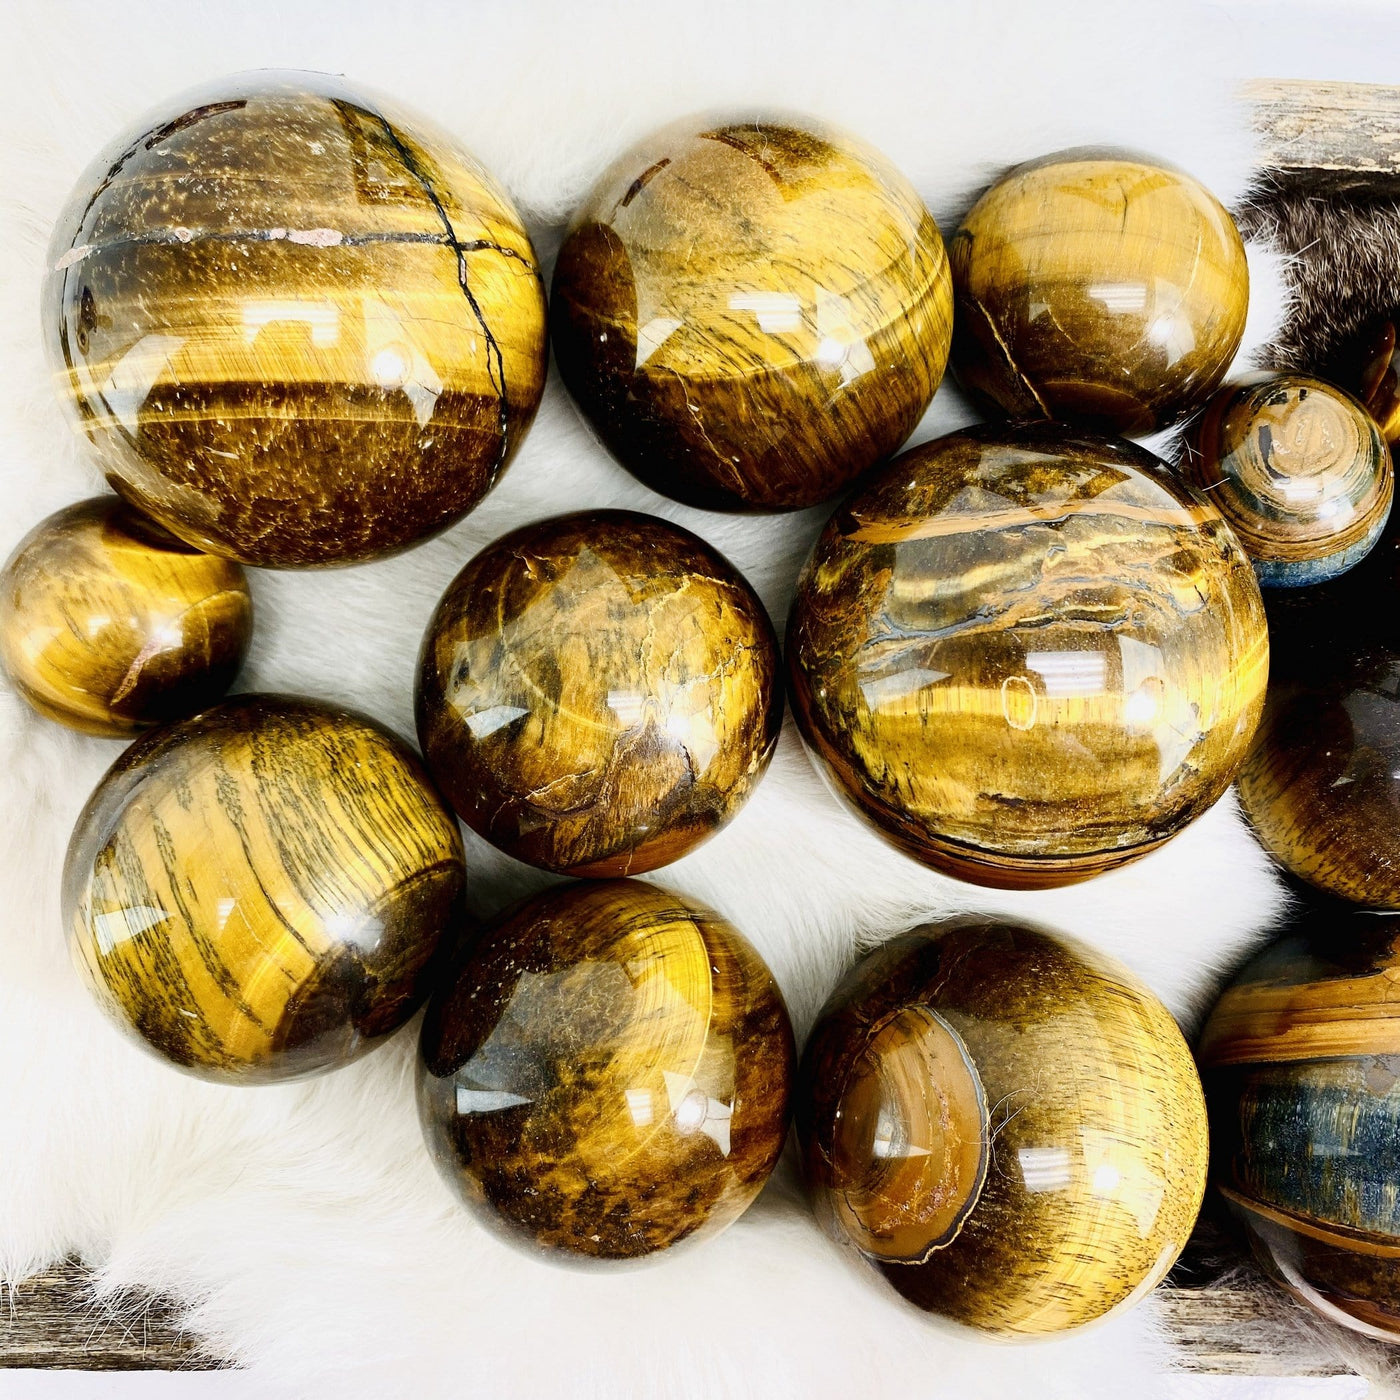 Tigers Eye Polished Spheres- Top view of size and symmetry. 